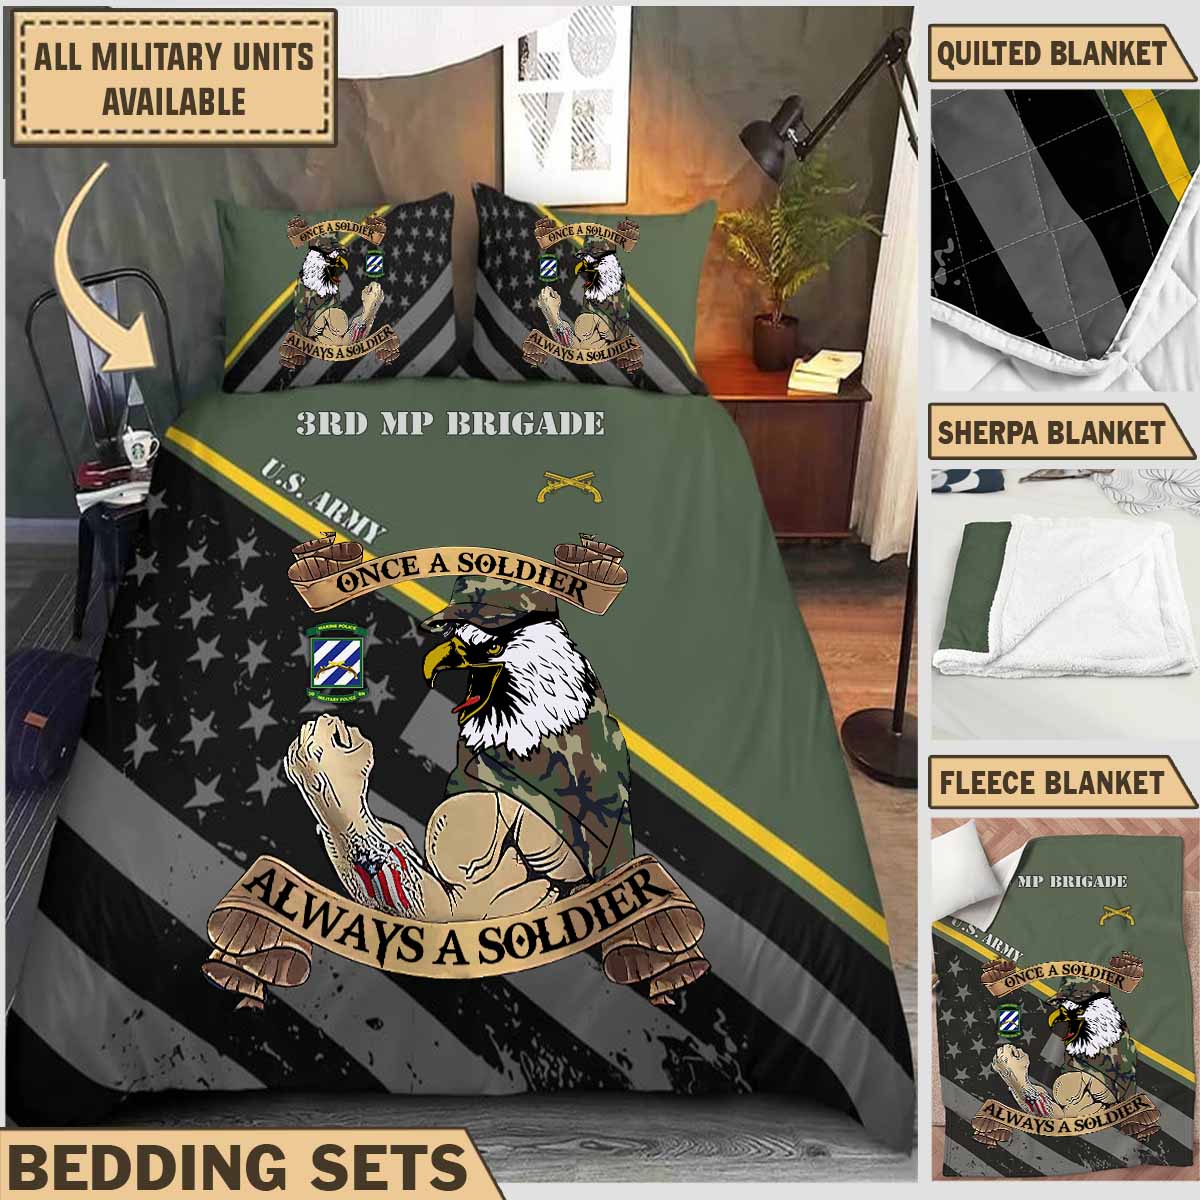 3rd MP BN 3rd Military Police Battalion_Bedding Collection